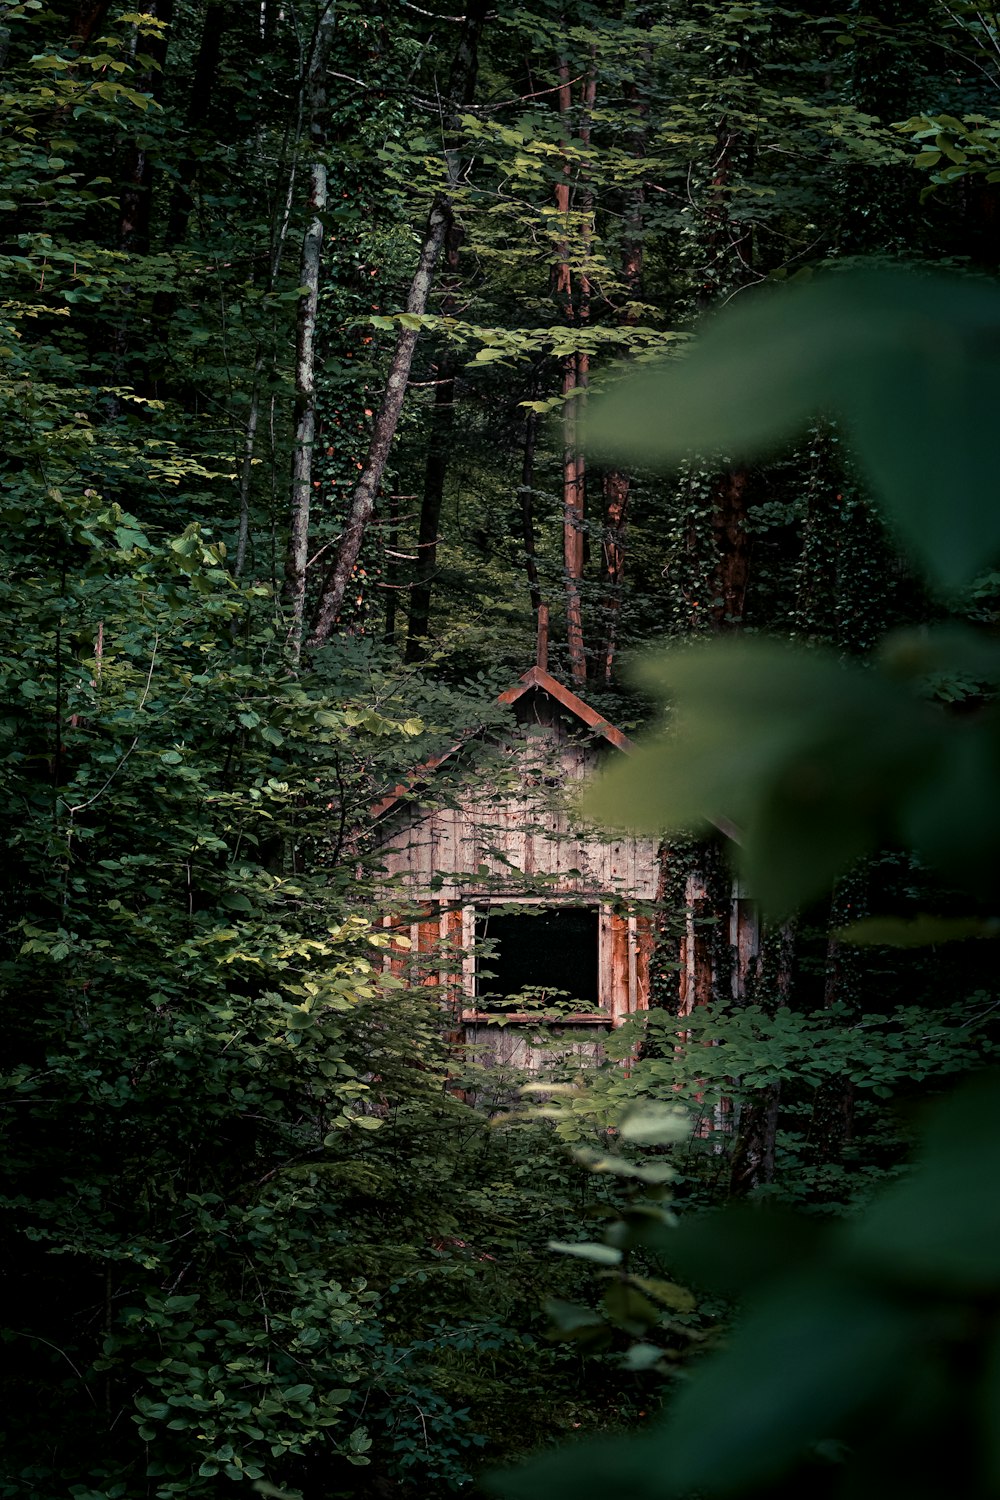 brown wooden house in the middle of the forest